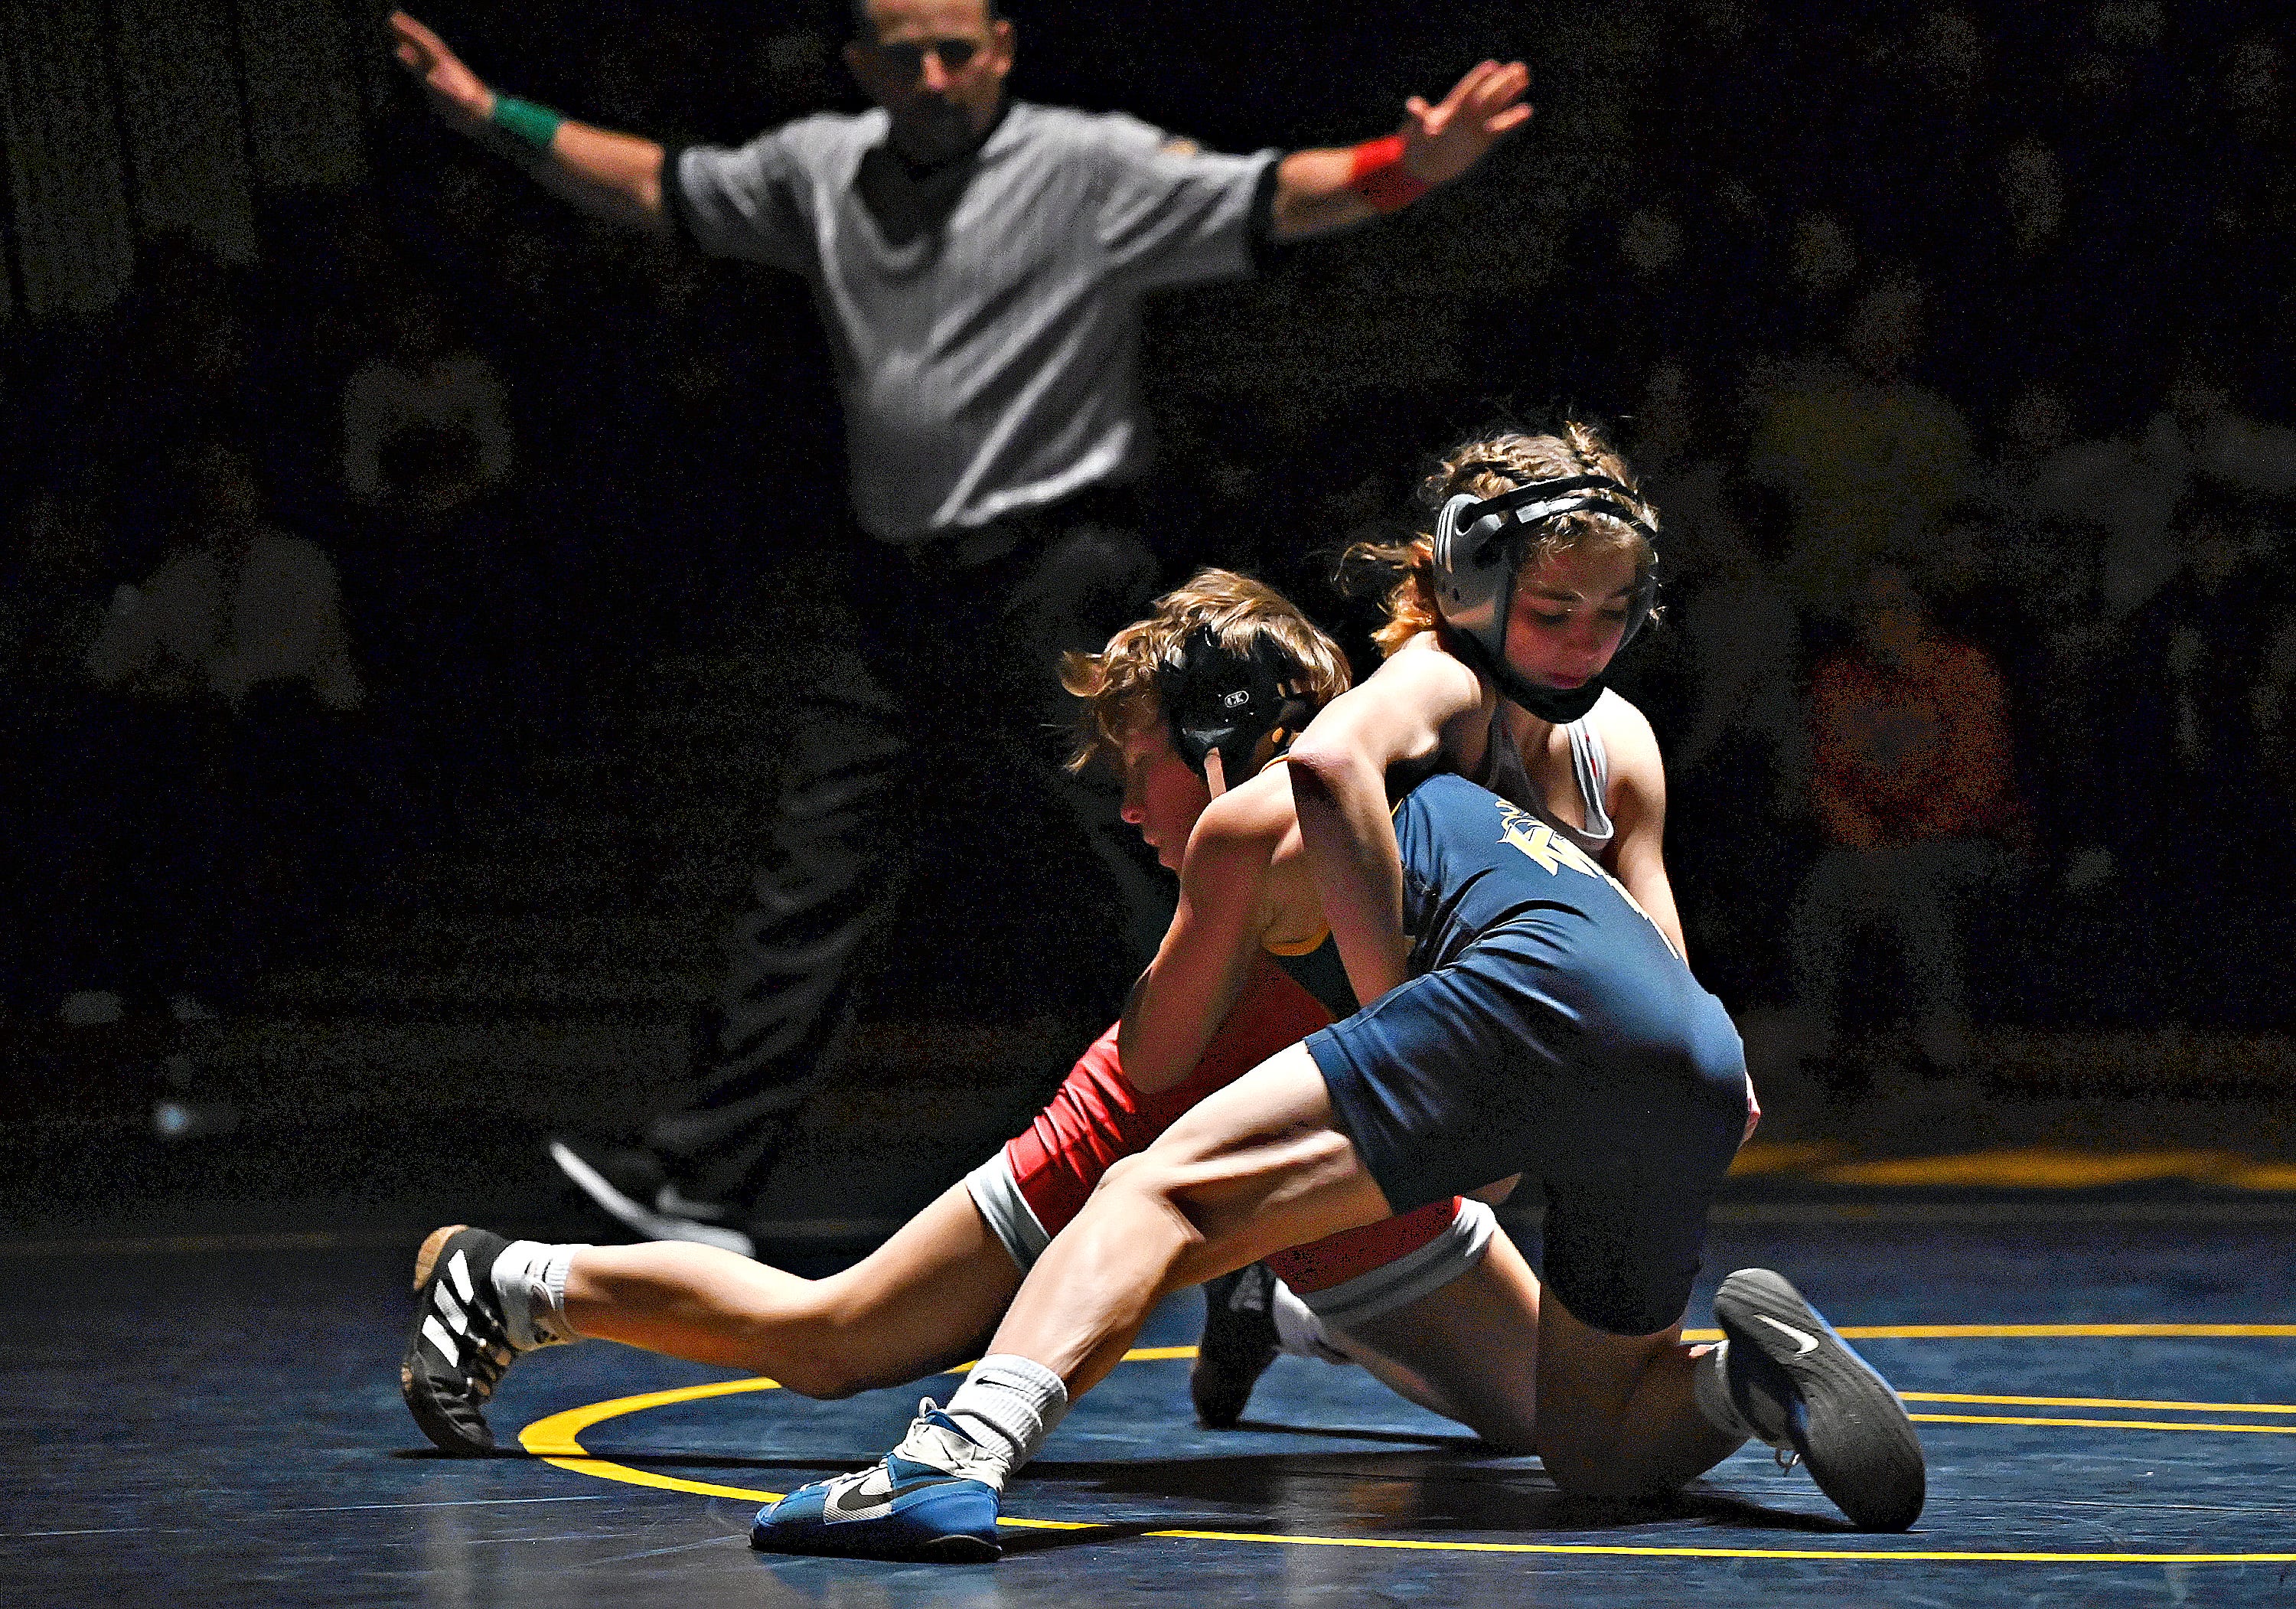 Eastern York’s Brock Adams, front, and Hamburg’s Isabelle Wilkes compete in the 107-pound weight class during PIAA District 3, Class 2-A first round wrestling action at Eastern York High School in Lower Windsor Township, Monday, Jan. 30, 2023. Adams would win the match and Eastern York would win the meet 50-22. Dawn J. Sagert photo